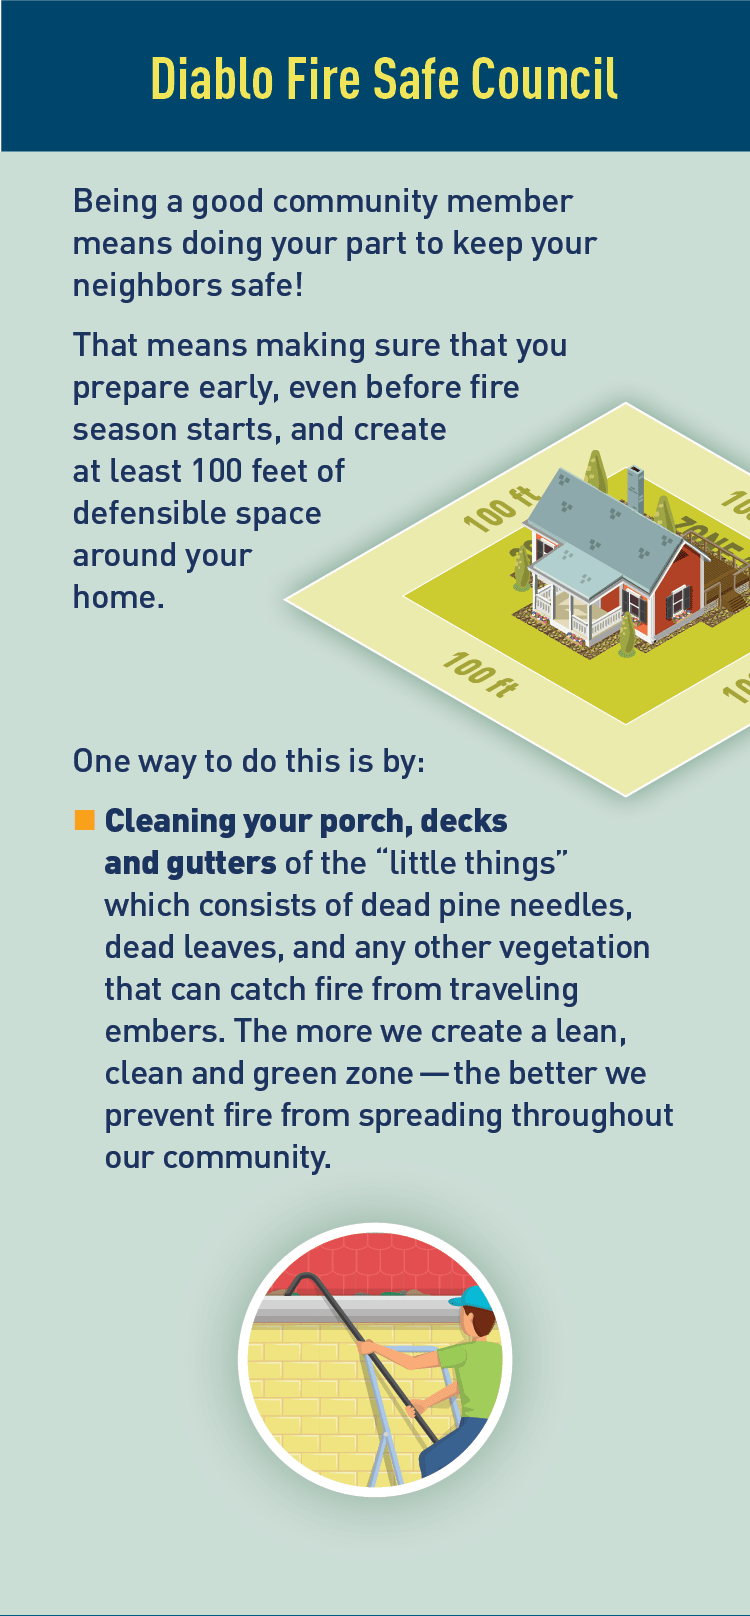 Graphics of defensible space and person cleaning gutter. Description: Diablo Fire Safe Council.  Being a good community member means doing your part to keep your neighbors safe!  That means making sure that you prepare early, even before fire season starts, and create at least 100 feet of defensible space around your home.  One way to do this is by:  Cleaning your porch, decks and gutters of the "little things" which consists of dead pine needles, dead leaves, and any other vegetation that can catch fire from traveling embers. The more we create a lean, clean and green zone - the better we prevent fire from spreading throughout our community.